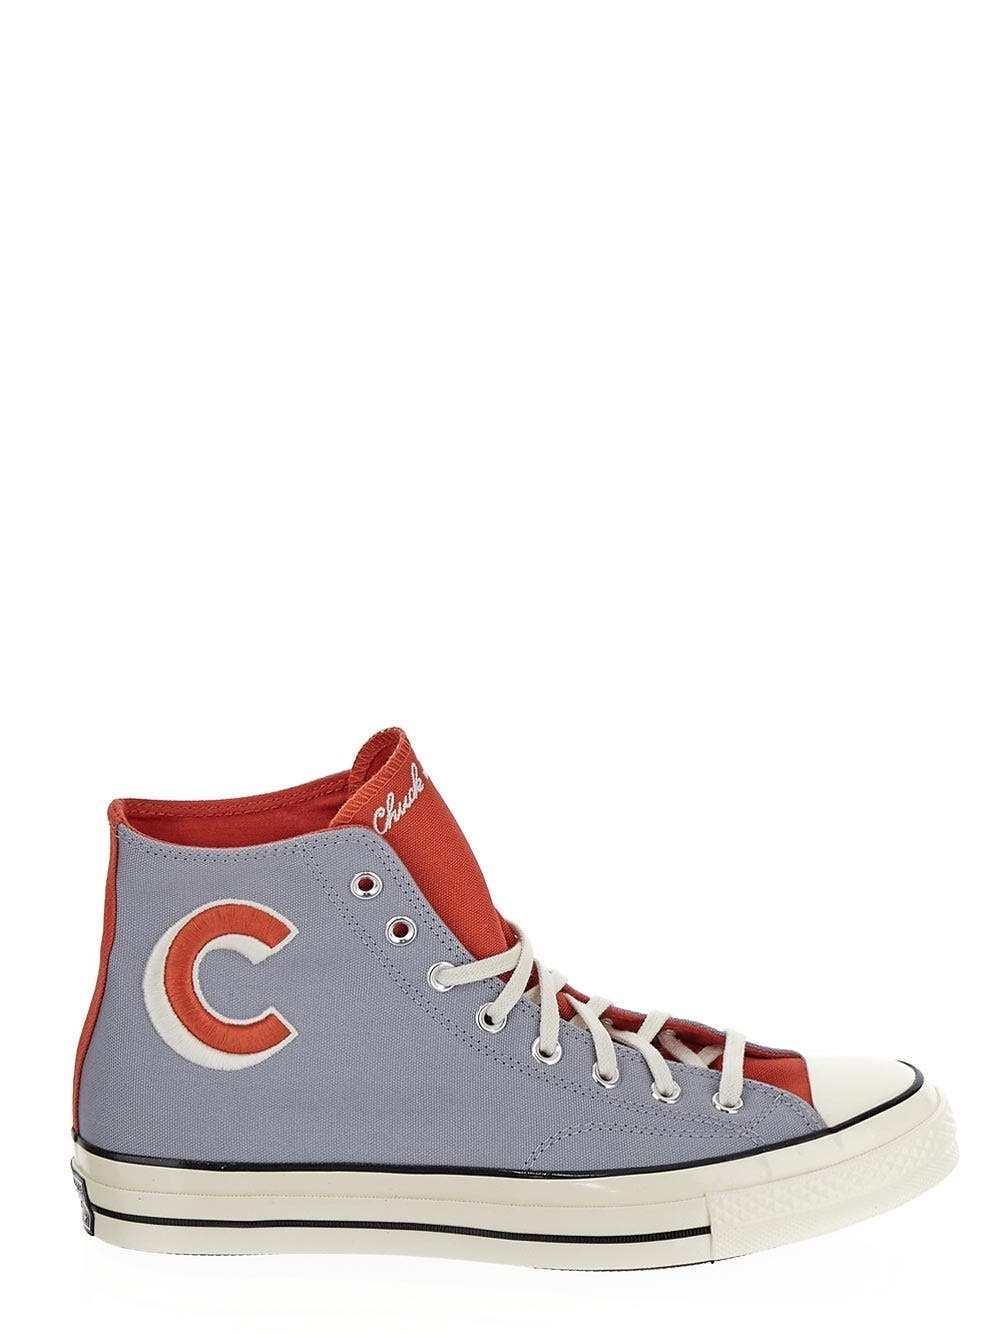 Photo: Converse High Top Sneakers